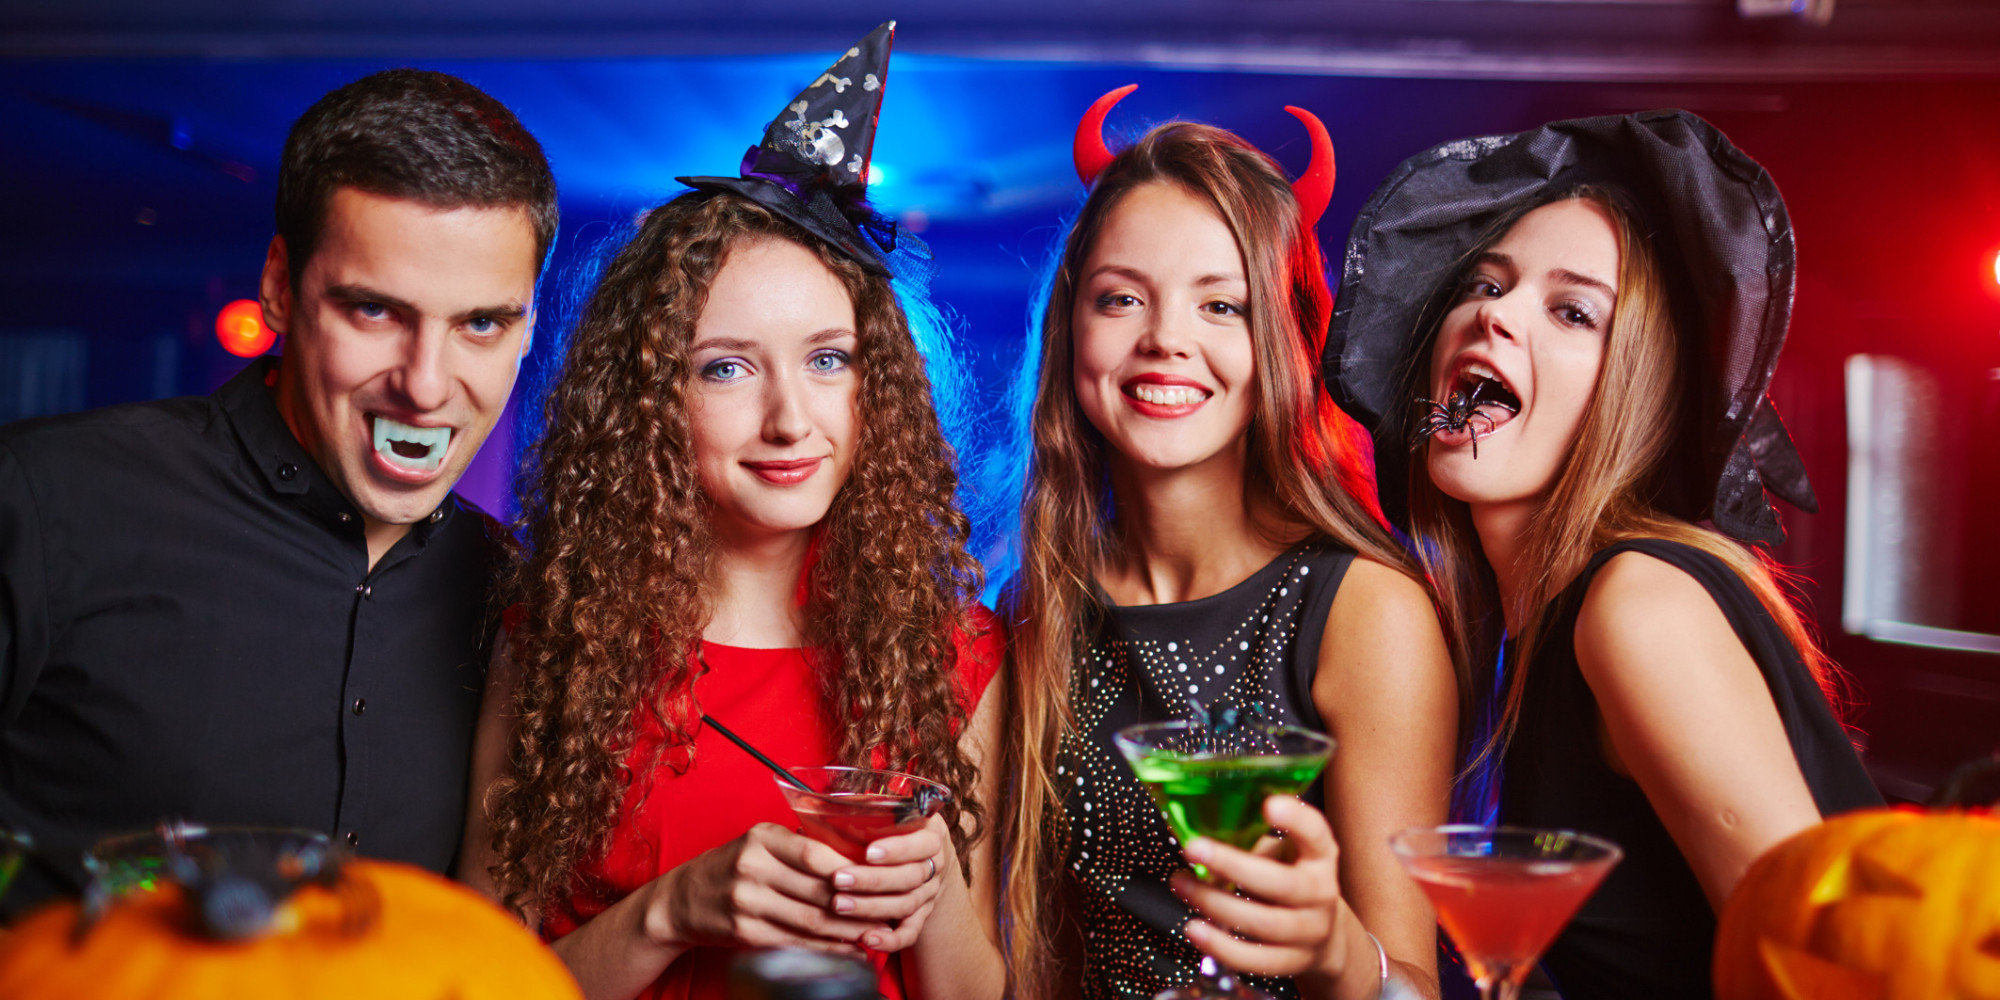 College Halloween Party Ideas
 How to Have Fun While Staying Safe at a College Halloween